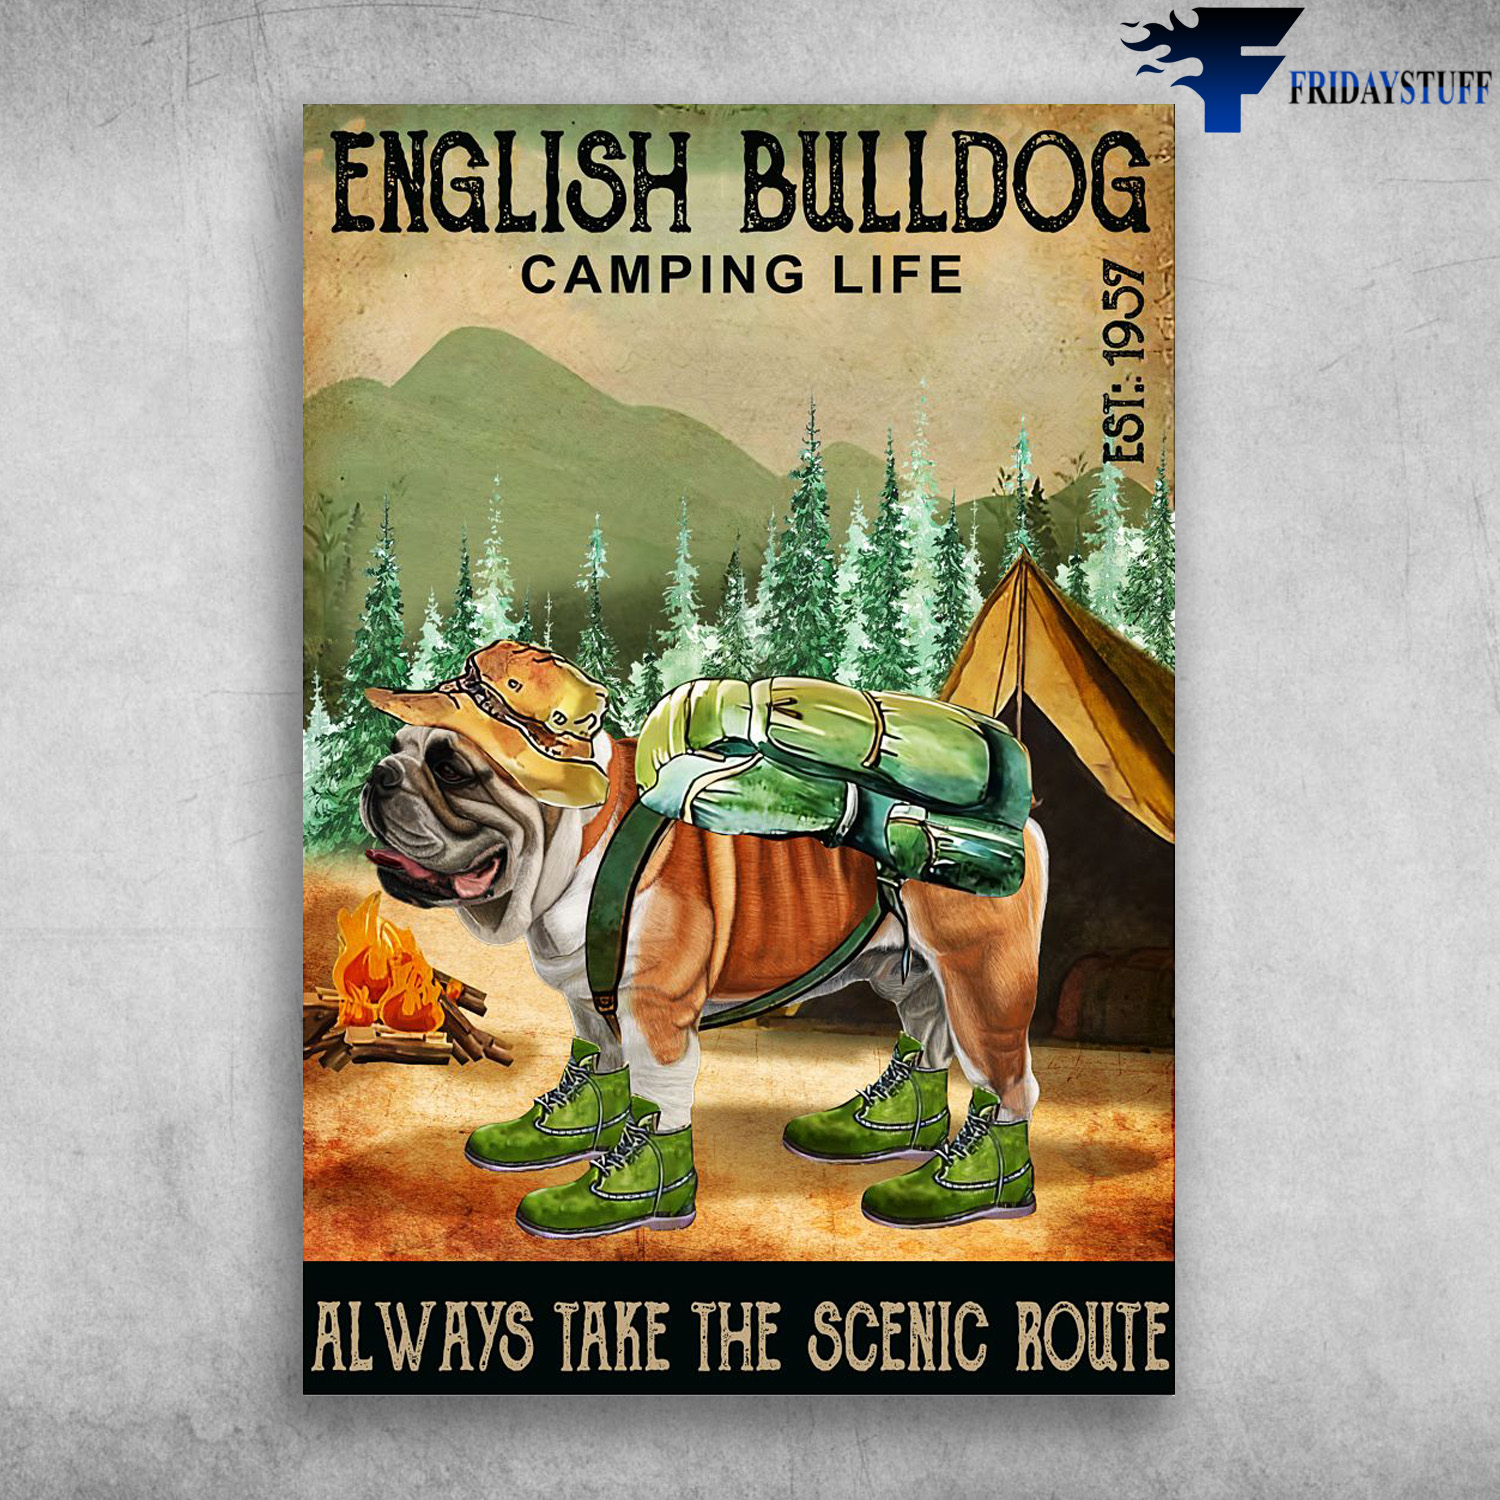 English Bulldog Camping - Camping Life, Always Take The Scenic Route, EST 1957